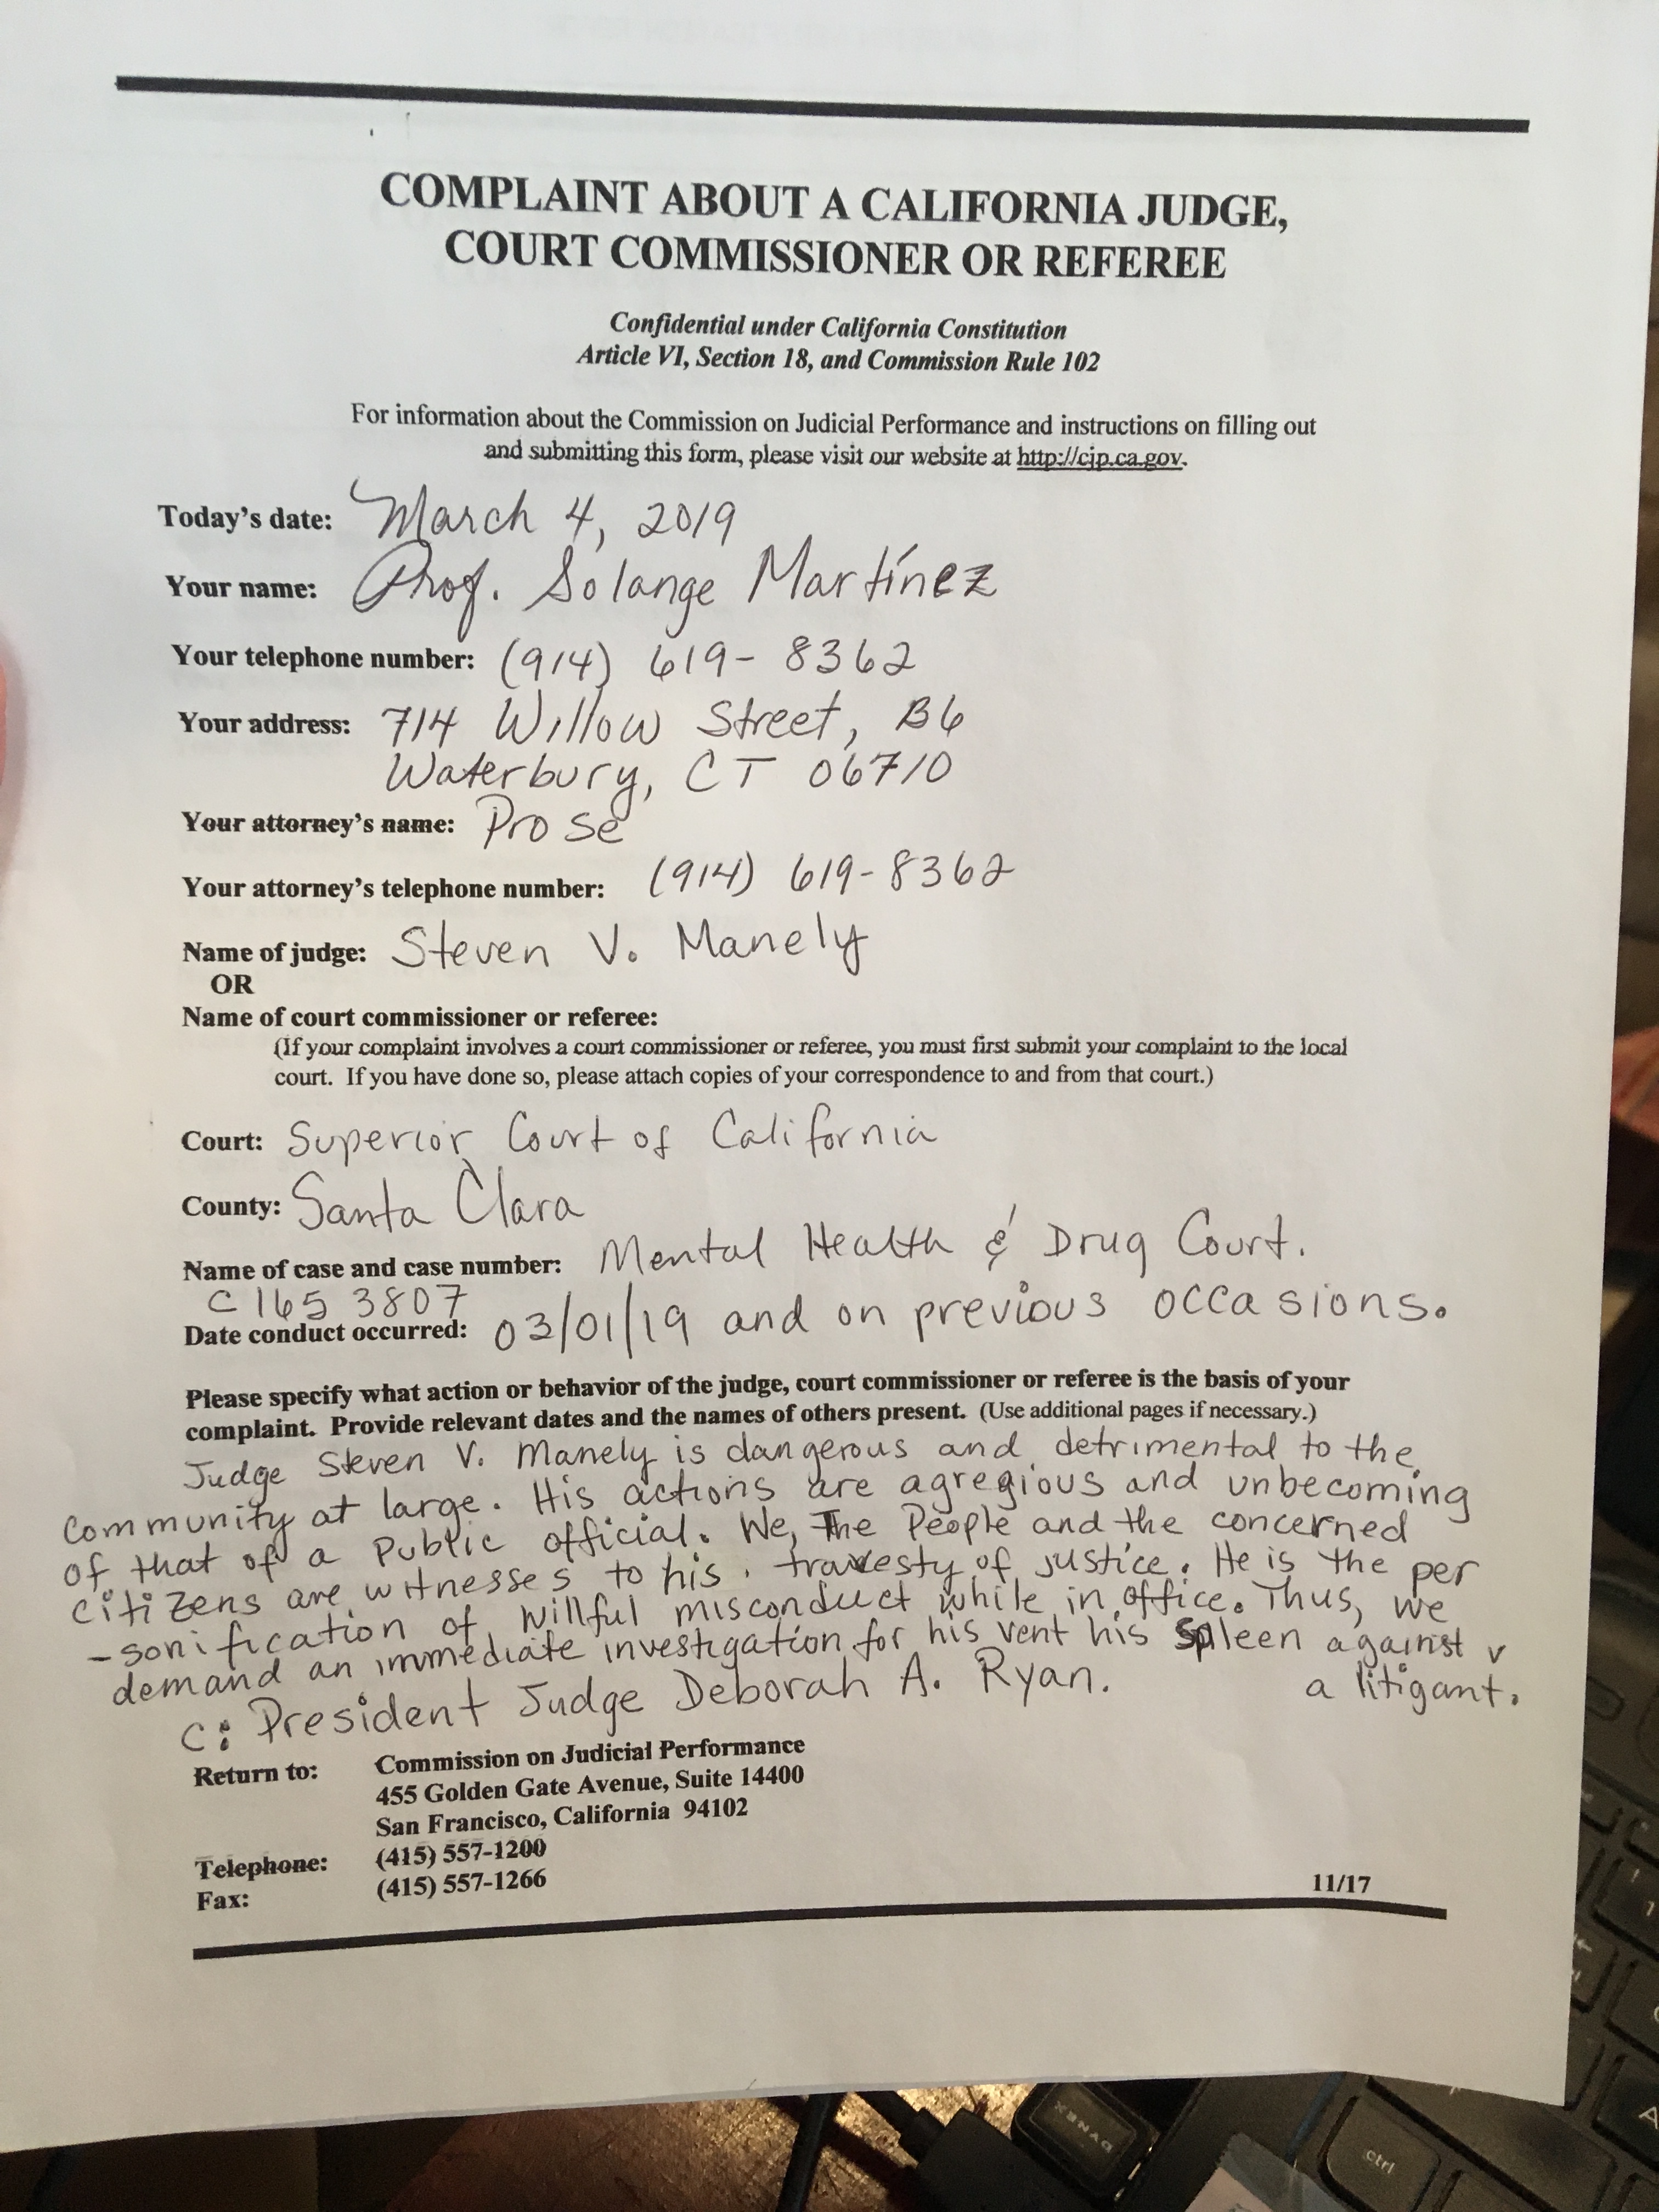 PROF MARTINE'S COMPLAINT FORM AGAINST JUDGE MANLEY, ON BEHALF OF TANIA MCCASH A MOTHER OF THREE